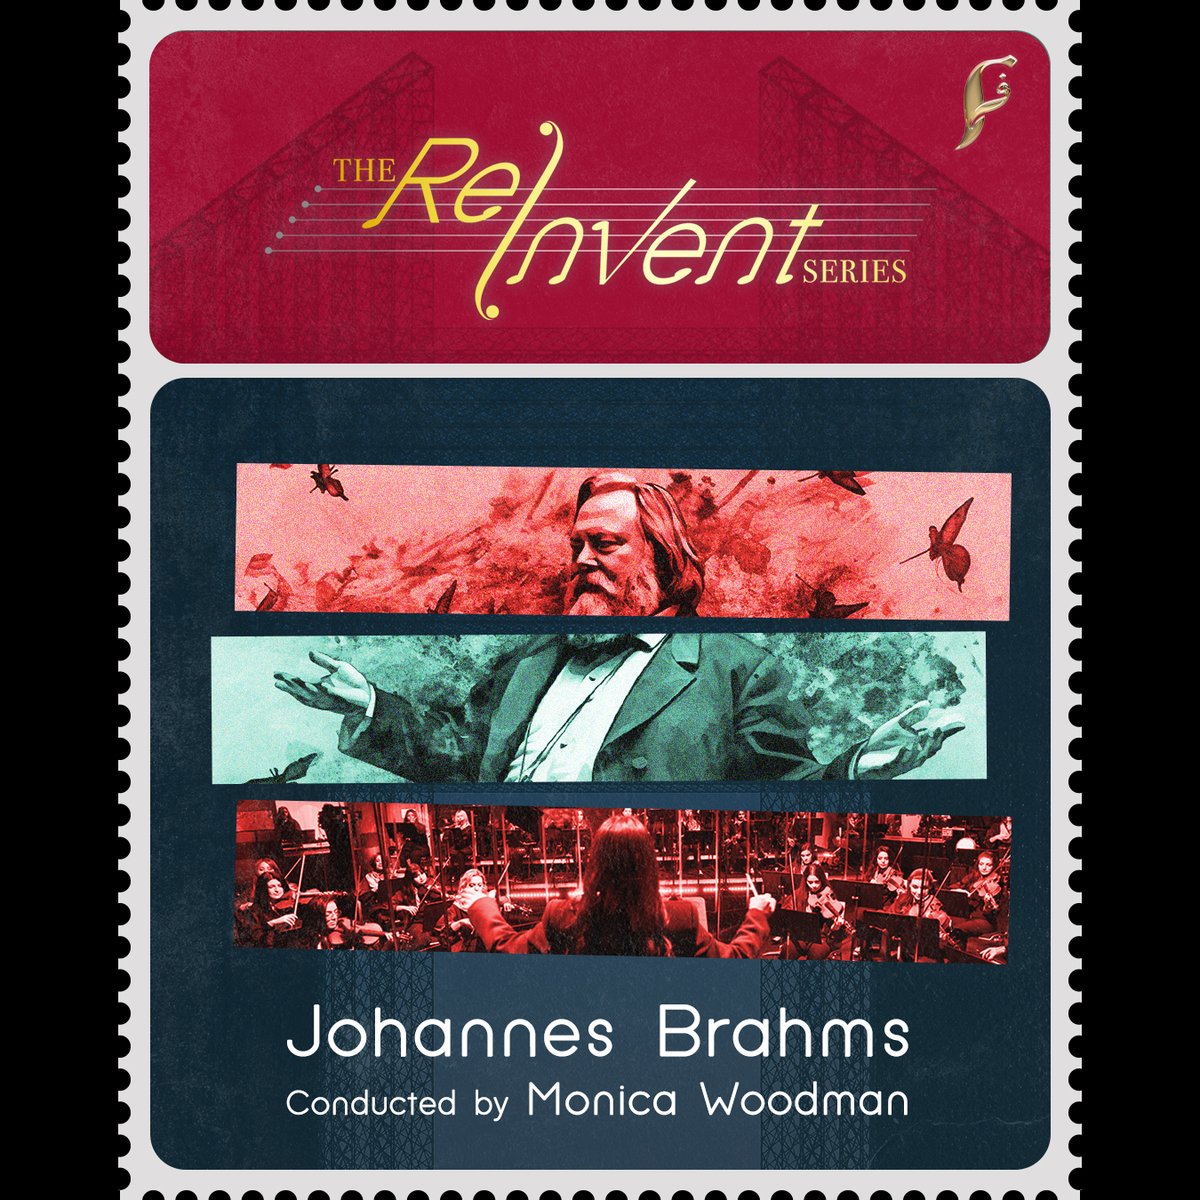 We told you something extraordinary was coming! Get ready for Johannes Brahms performed by the Firdaus Orchestra. We're taking you on a journey to ReInvent his renowned music. Stay tuned!
@firdausstudio @arrahman #TheReInventseries #FirdausOrchestra #ExpoCityDubai #Brahms